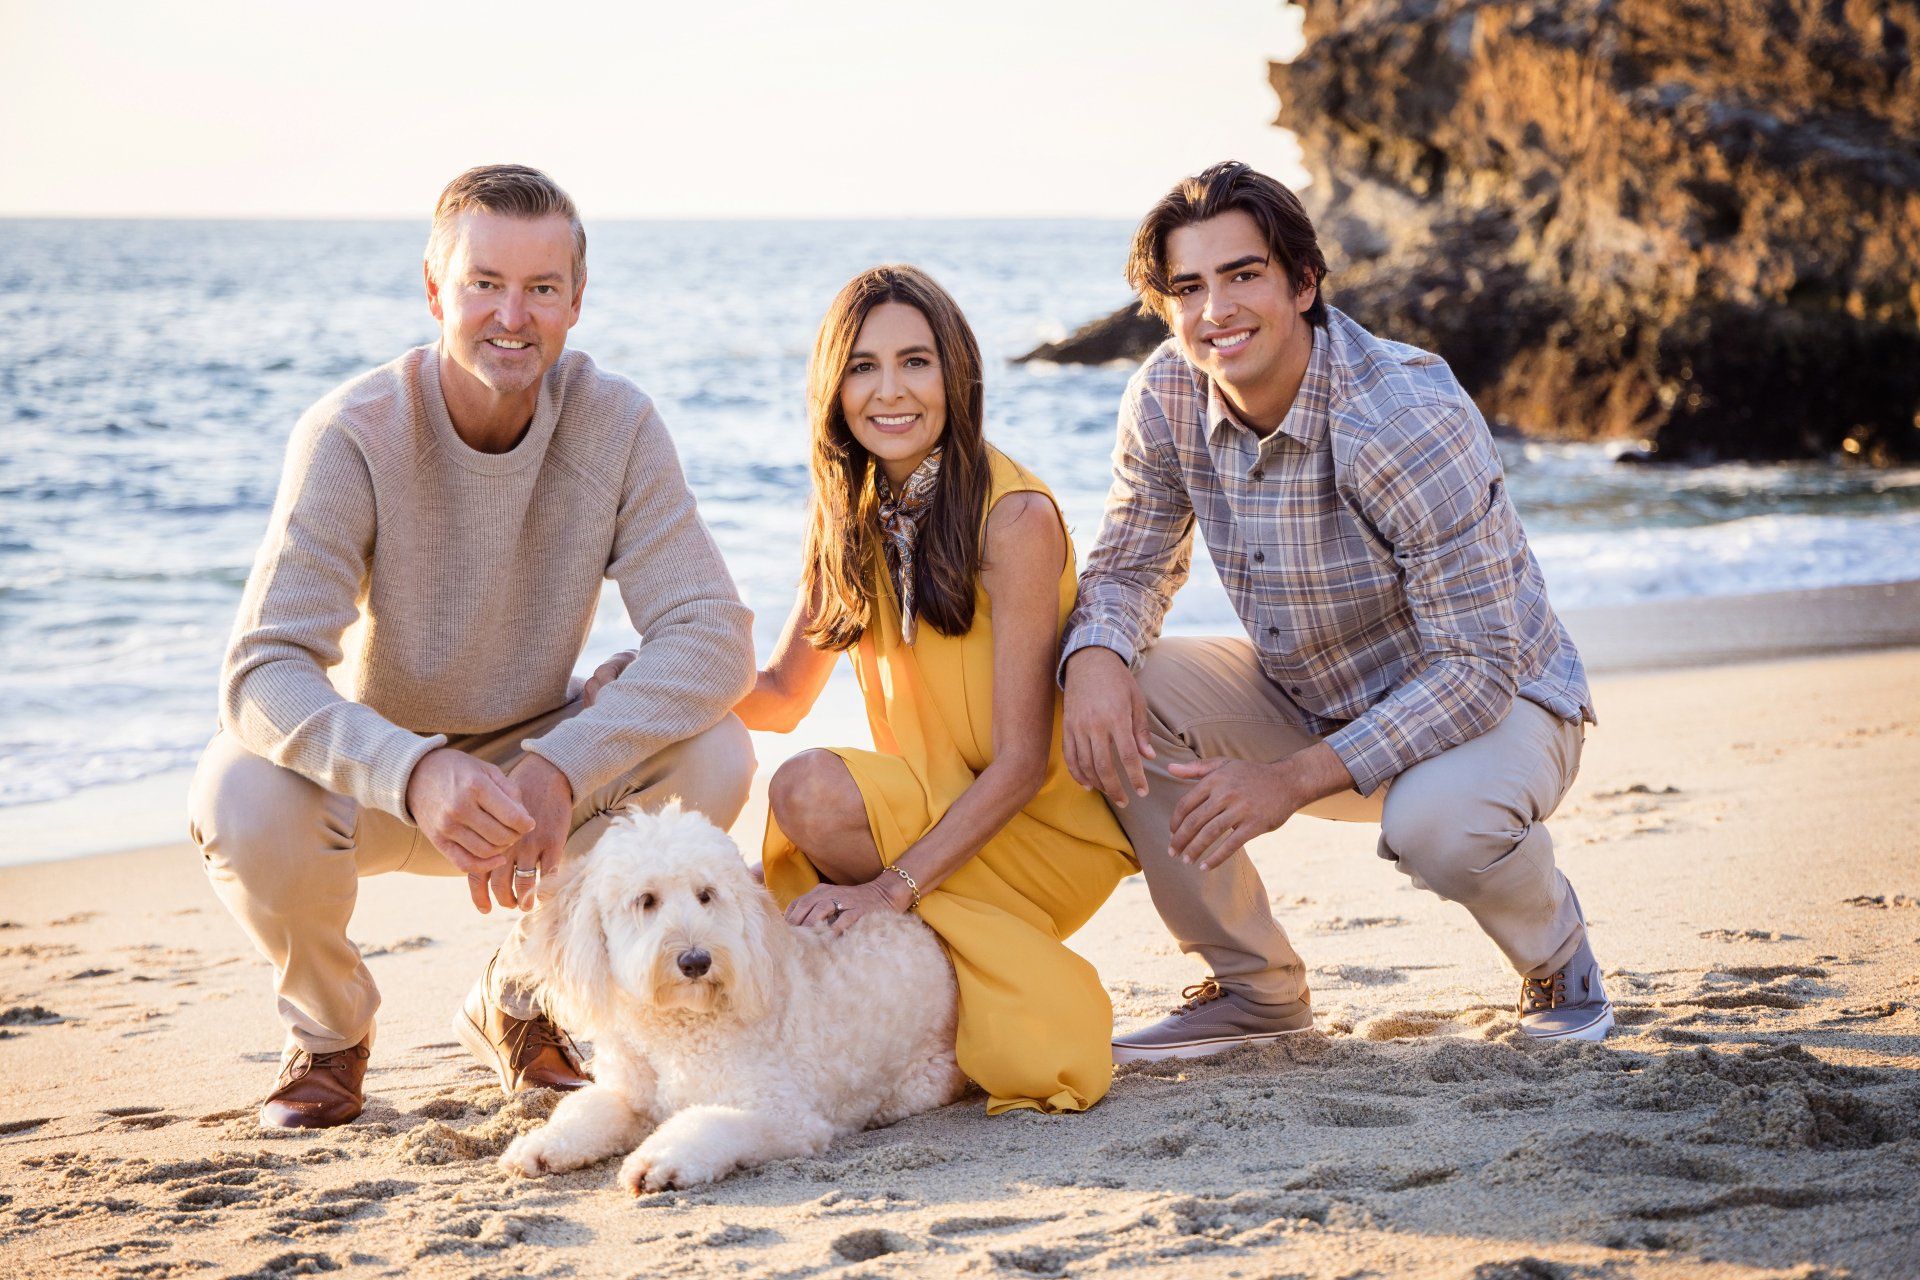 Family photoshoot on the beach near the Waldorf Astoria.  This family photoshoot included the family dog.